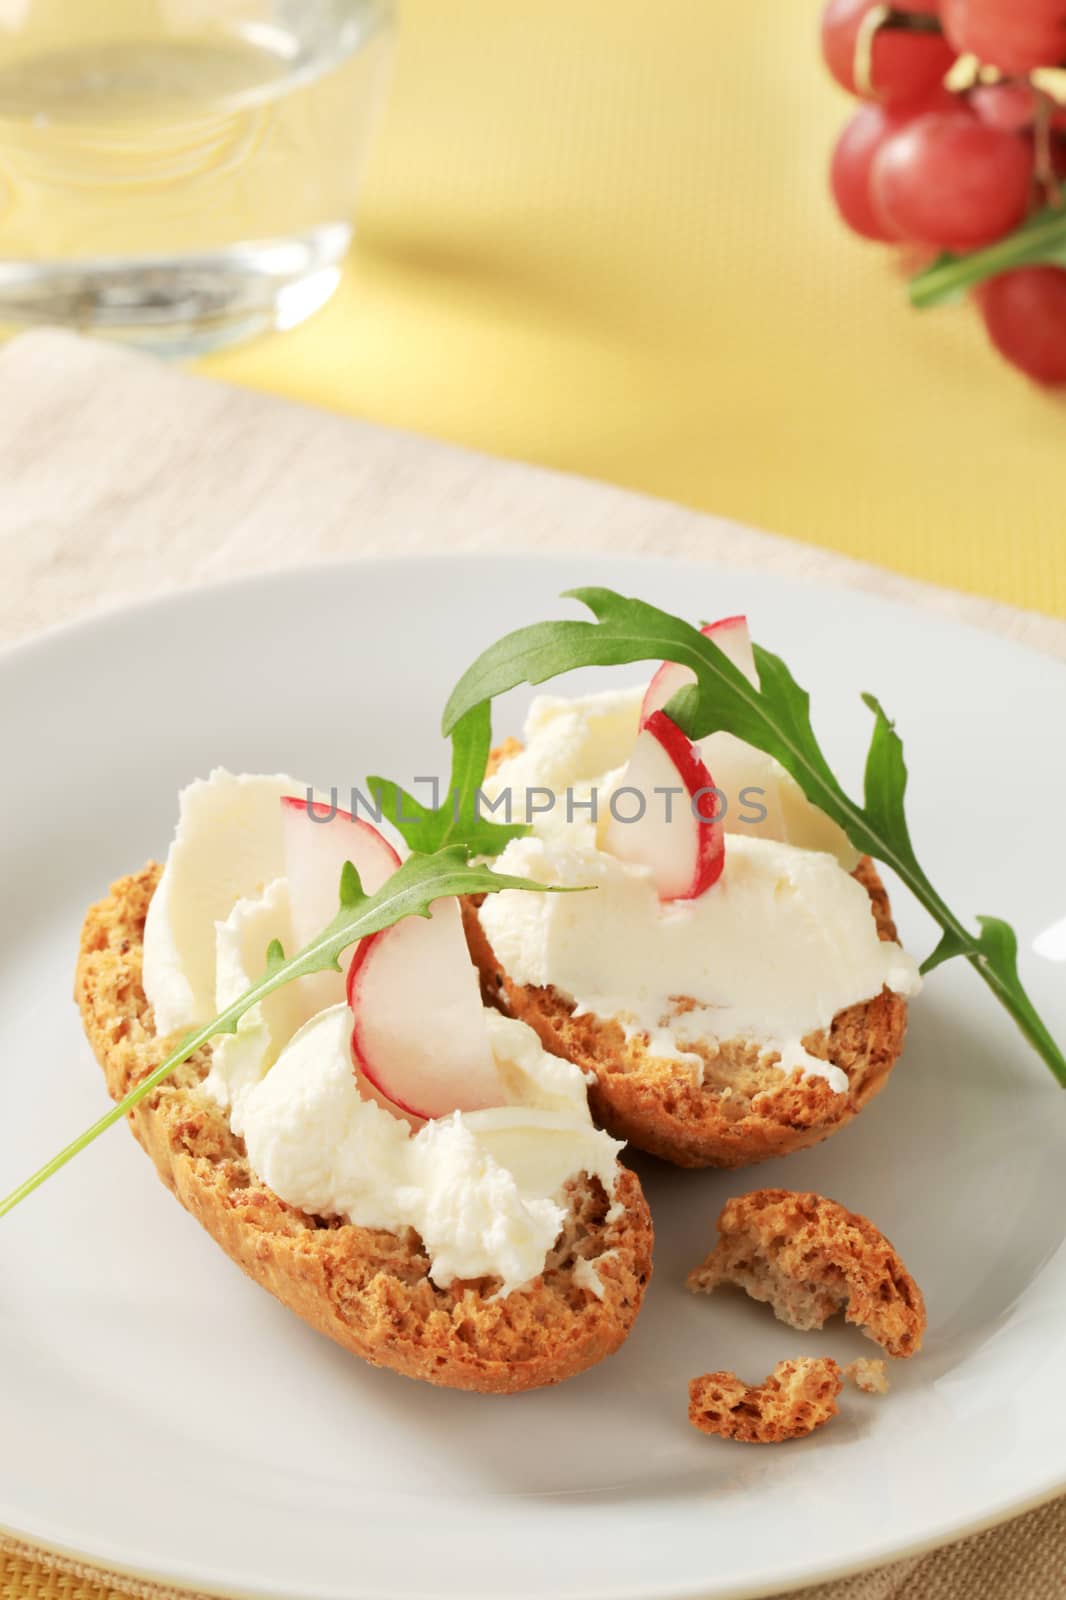 Crisp rolls with cheese spread and radish